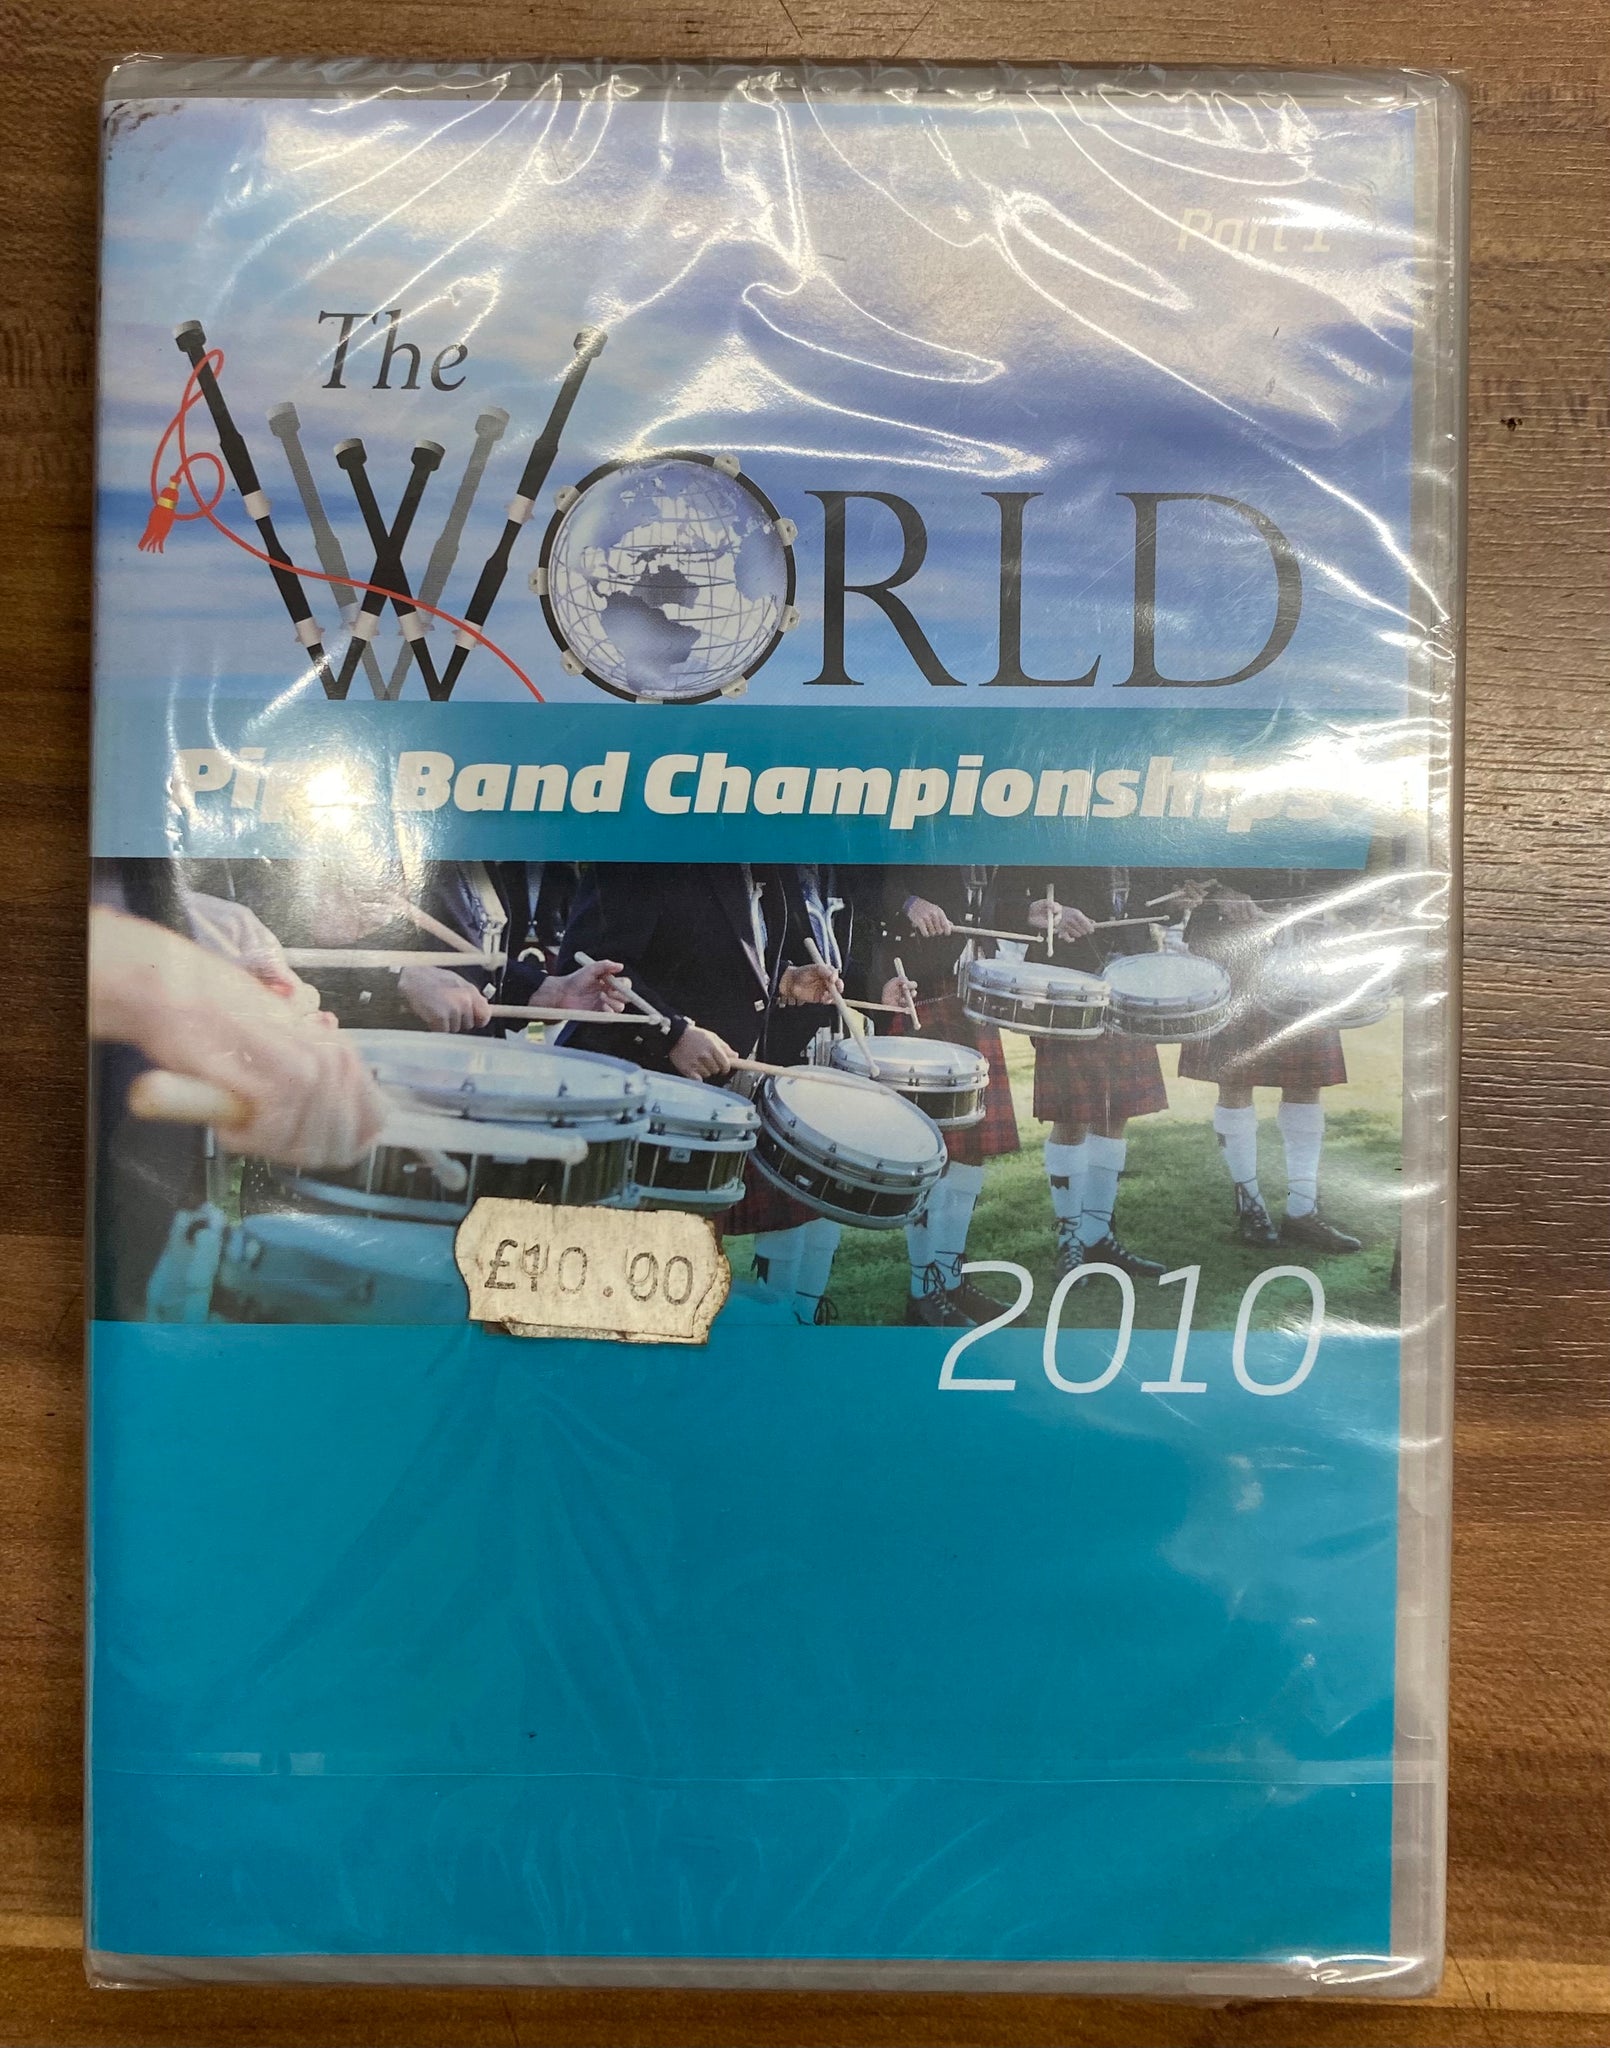 The World Pipe Band Championship 2010 Part 1 - DVD - Kilberry Bagpipes